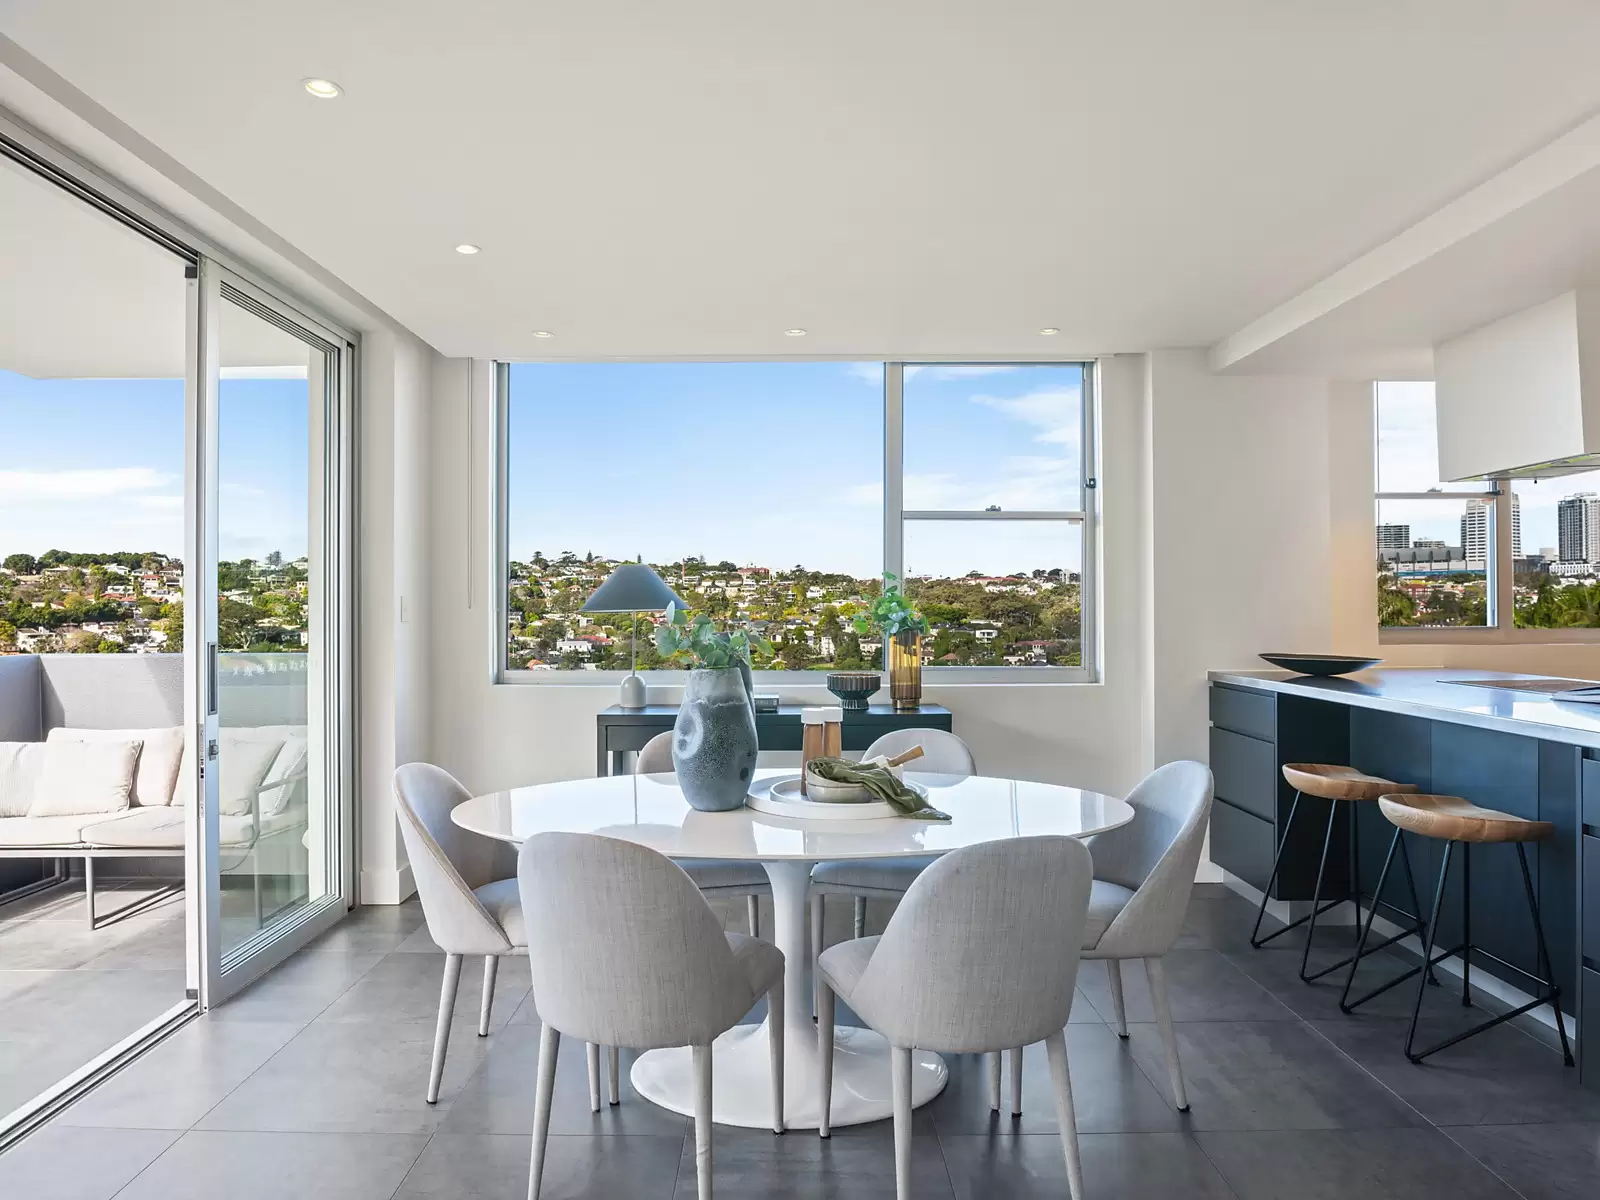 Photo #4: 13/321 Edgecliff Road, Woollahra - Sold by Sydney Sotheby's International Realty